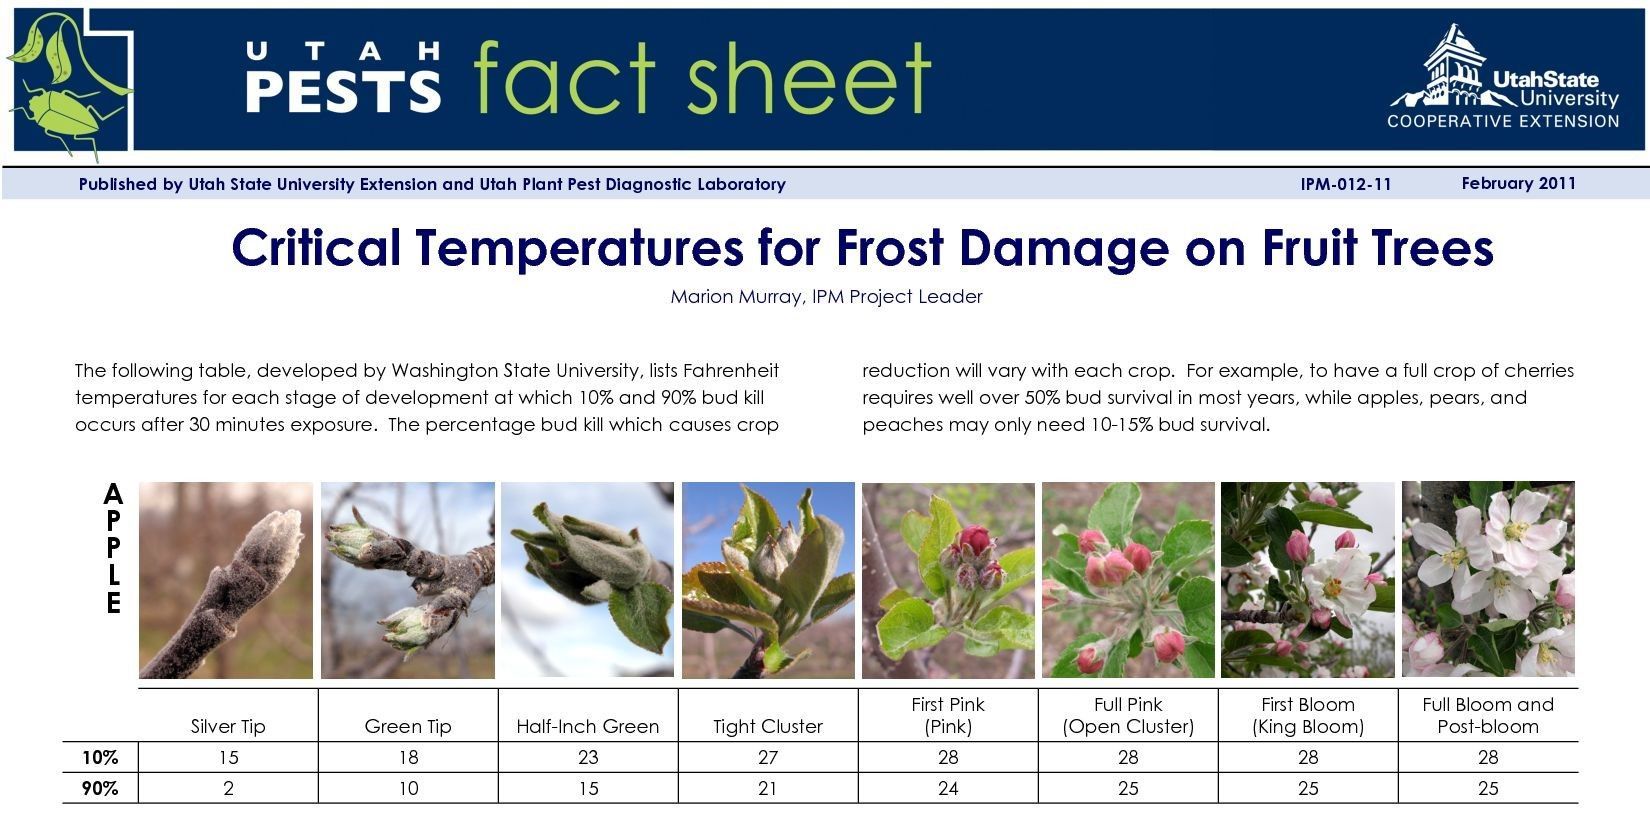 a fact sheet about critical temperatures for frost damage on fruit trees